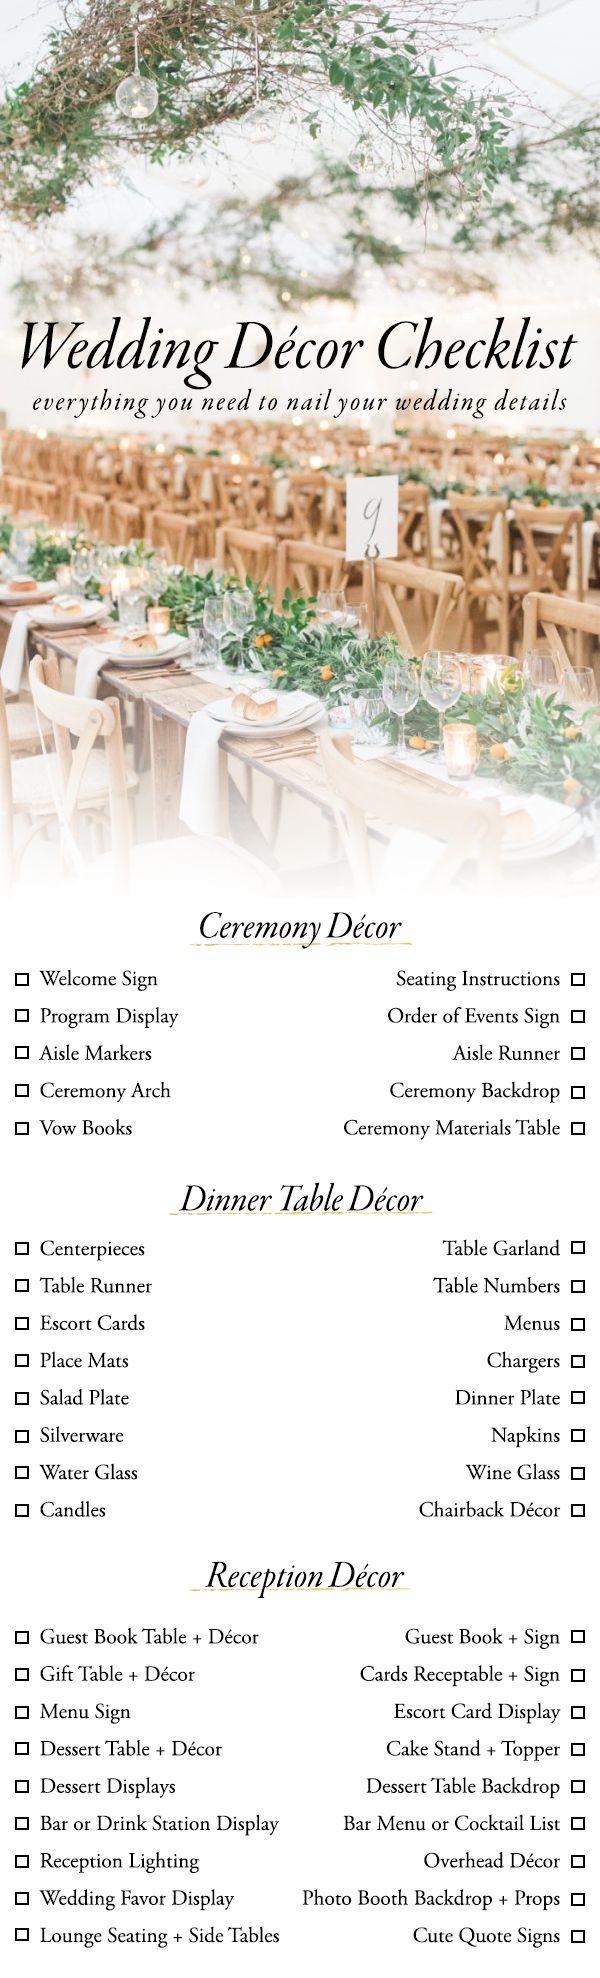 Wedding - Use This Wedding Décor Checklist To Help You Nail Every Detail